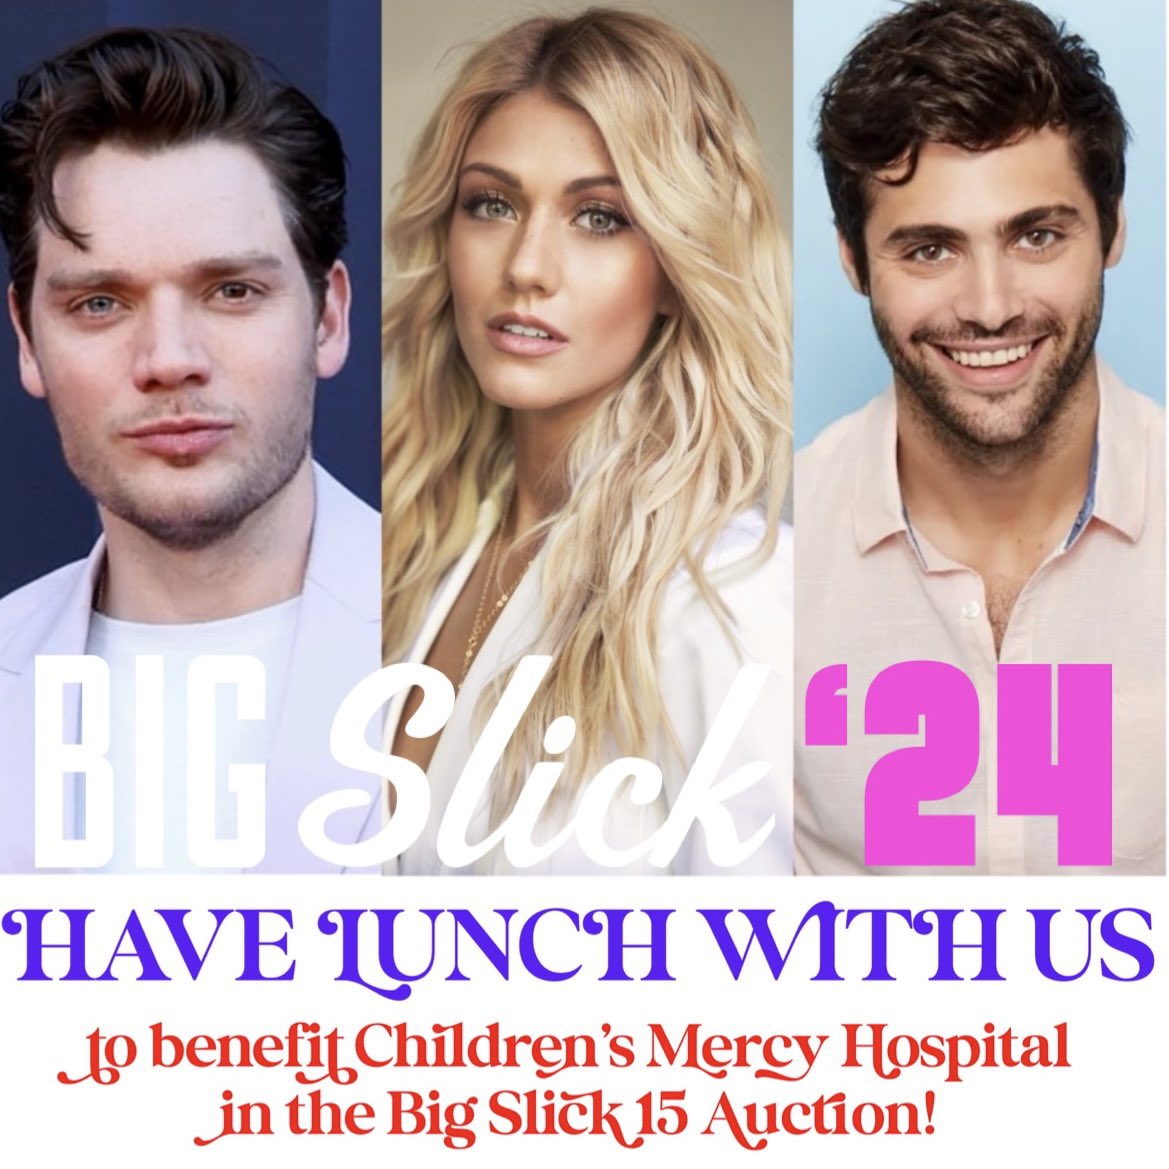 By the angel! How would you like to have lunch with us? Join #domsherwood, @MatthewDaddario , and myself for a lunch to support @ChildrensMercy and @BigSlickKC! The Big Slick is an organization where Hollywood meets Kansas City for some #SeriousFun. 100% of the proceeds from this